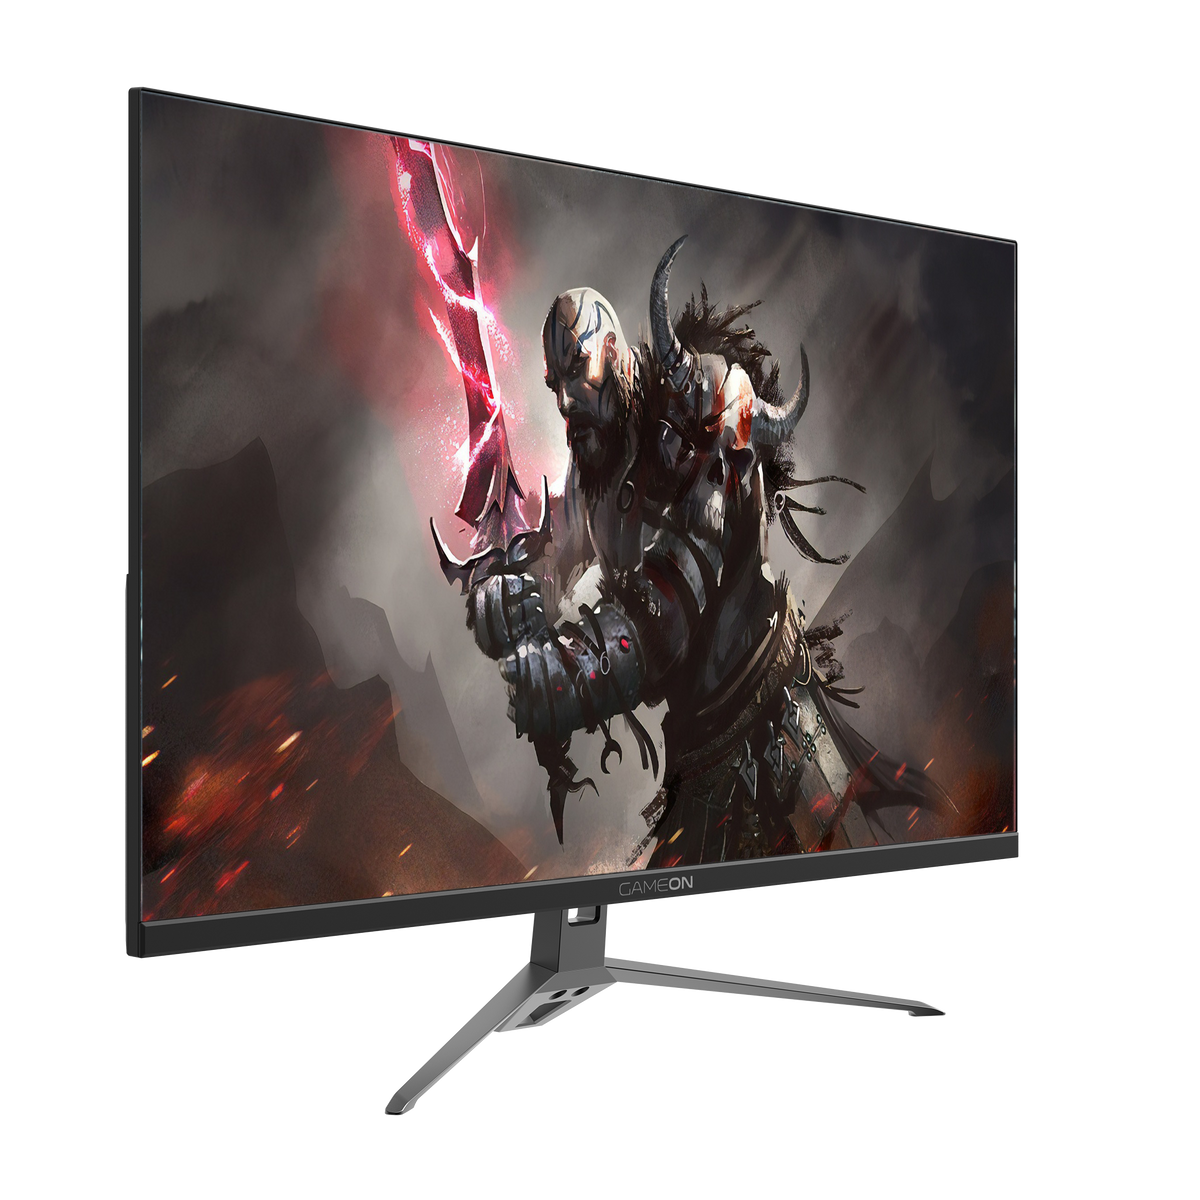 GAMEON GOP27FHD240VA 27" FHD, 240Hz, 1ms (1920x1080) Flat VA Gaming Monitor With G-Sync & Free Sync - Black (HDMI 2.1 Console Compatible)